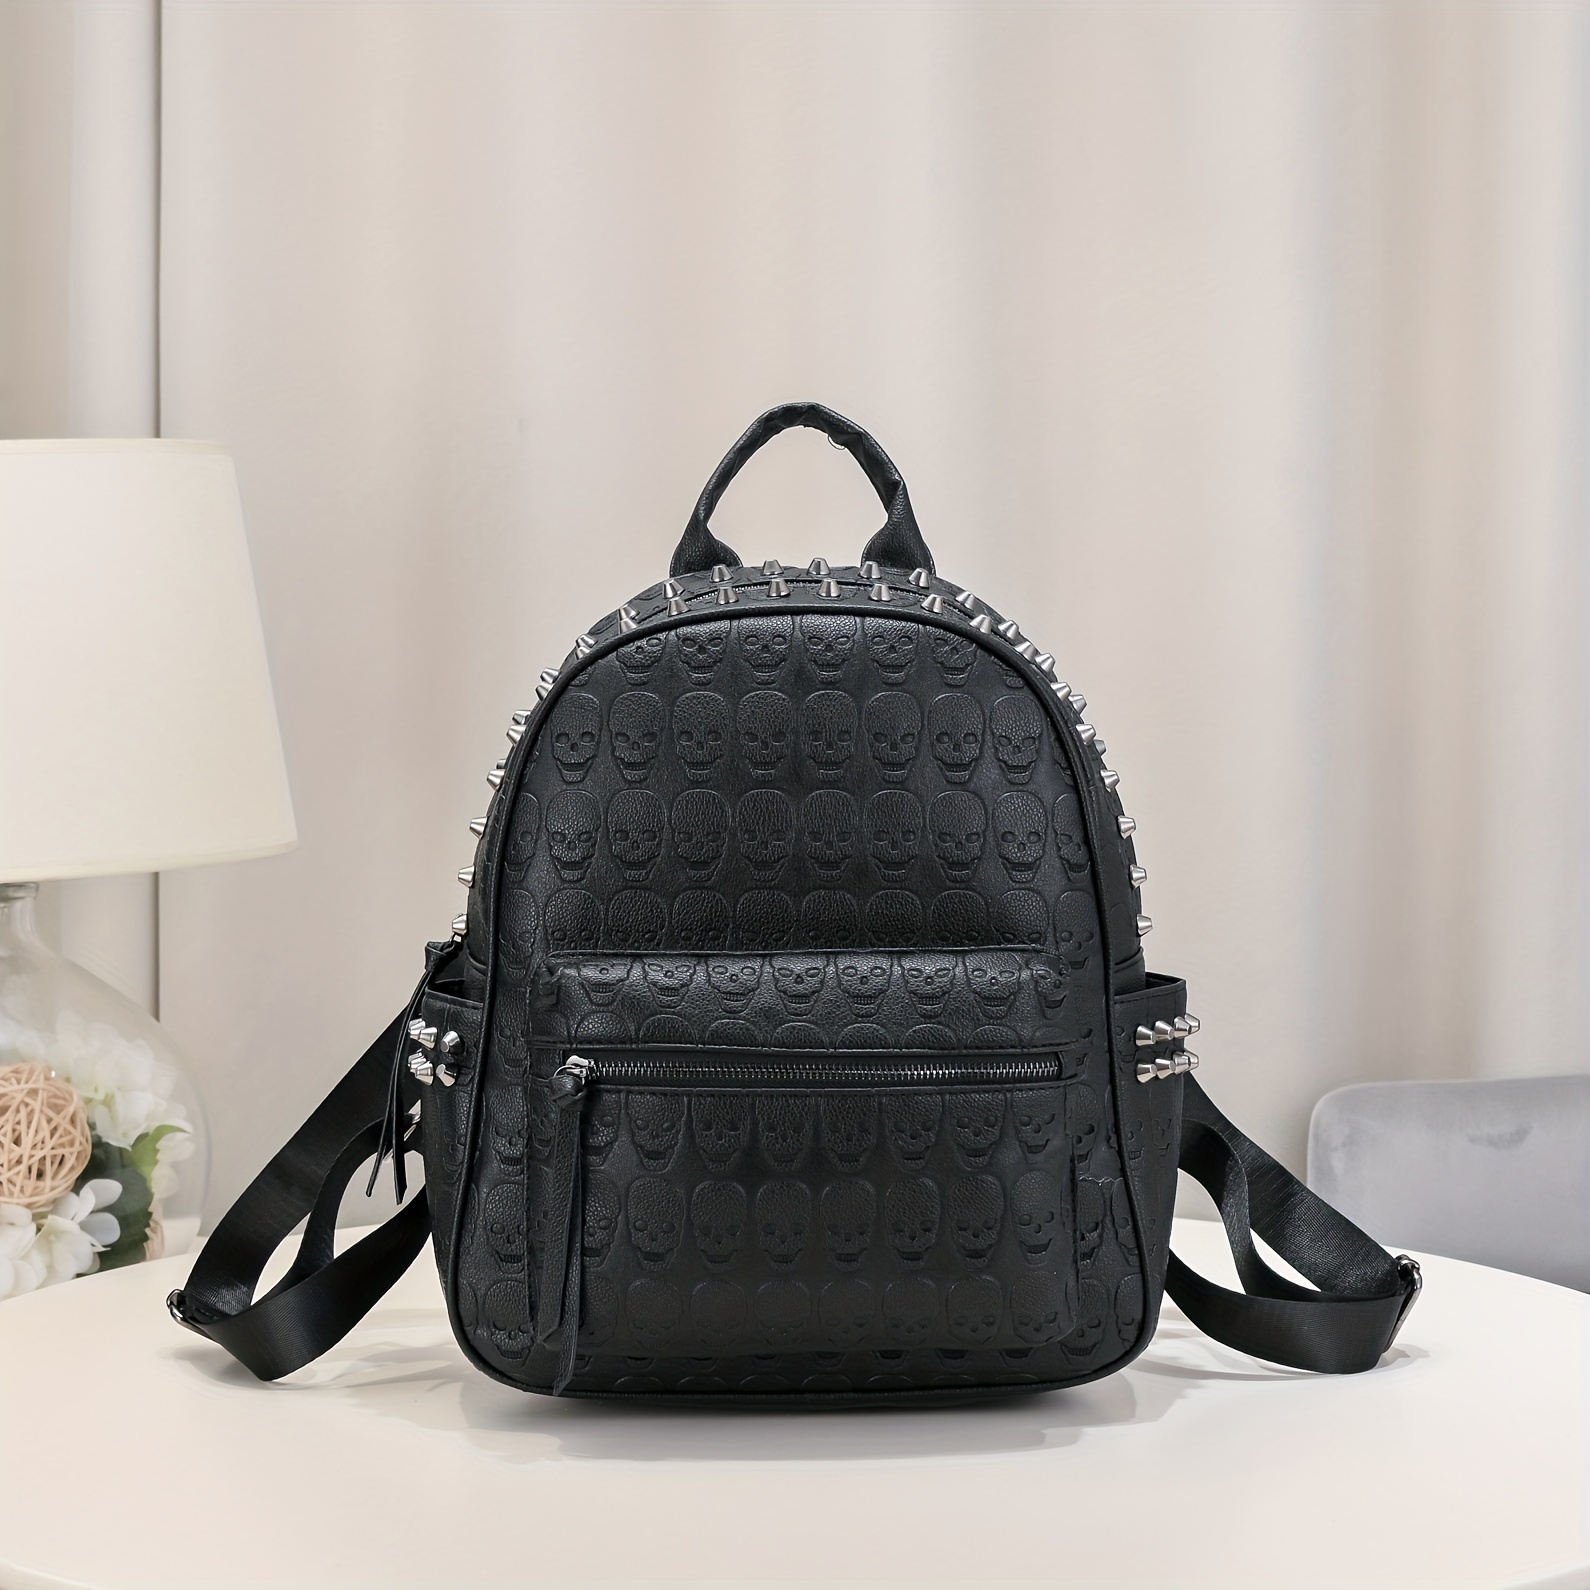 Gucci Black Guccissima Leather Backpacks